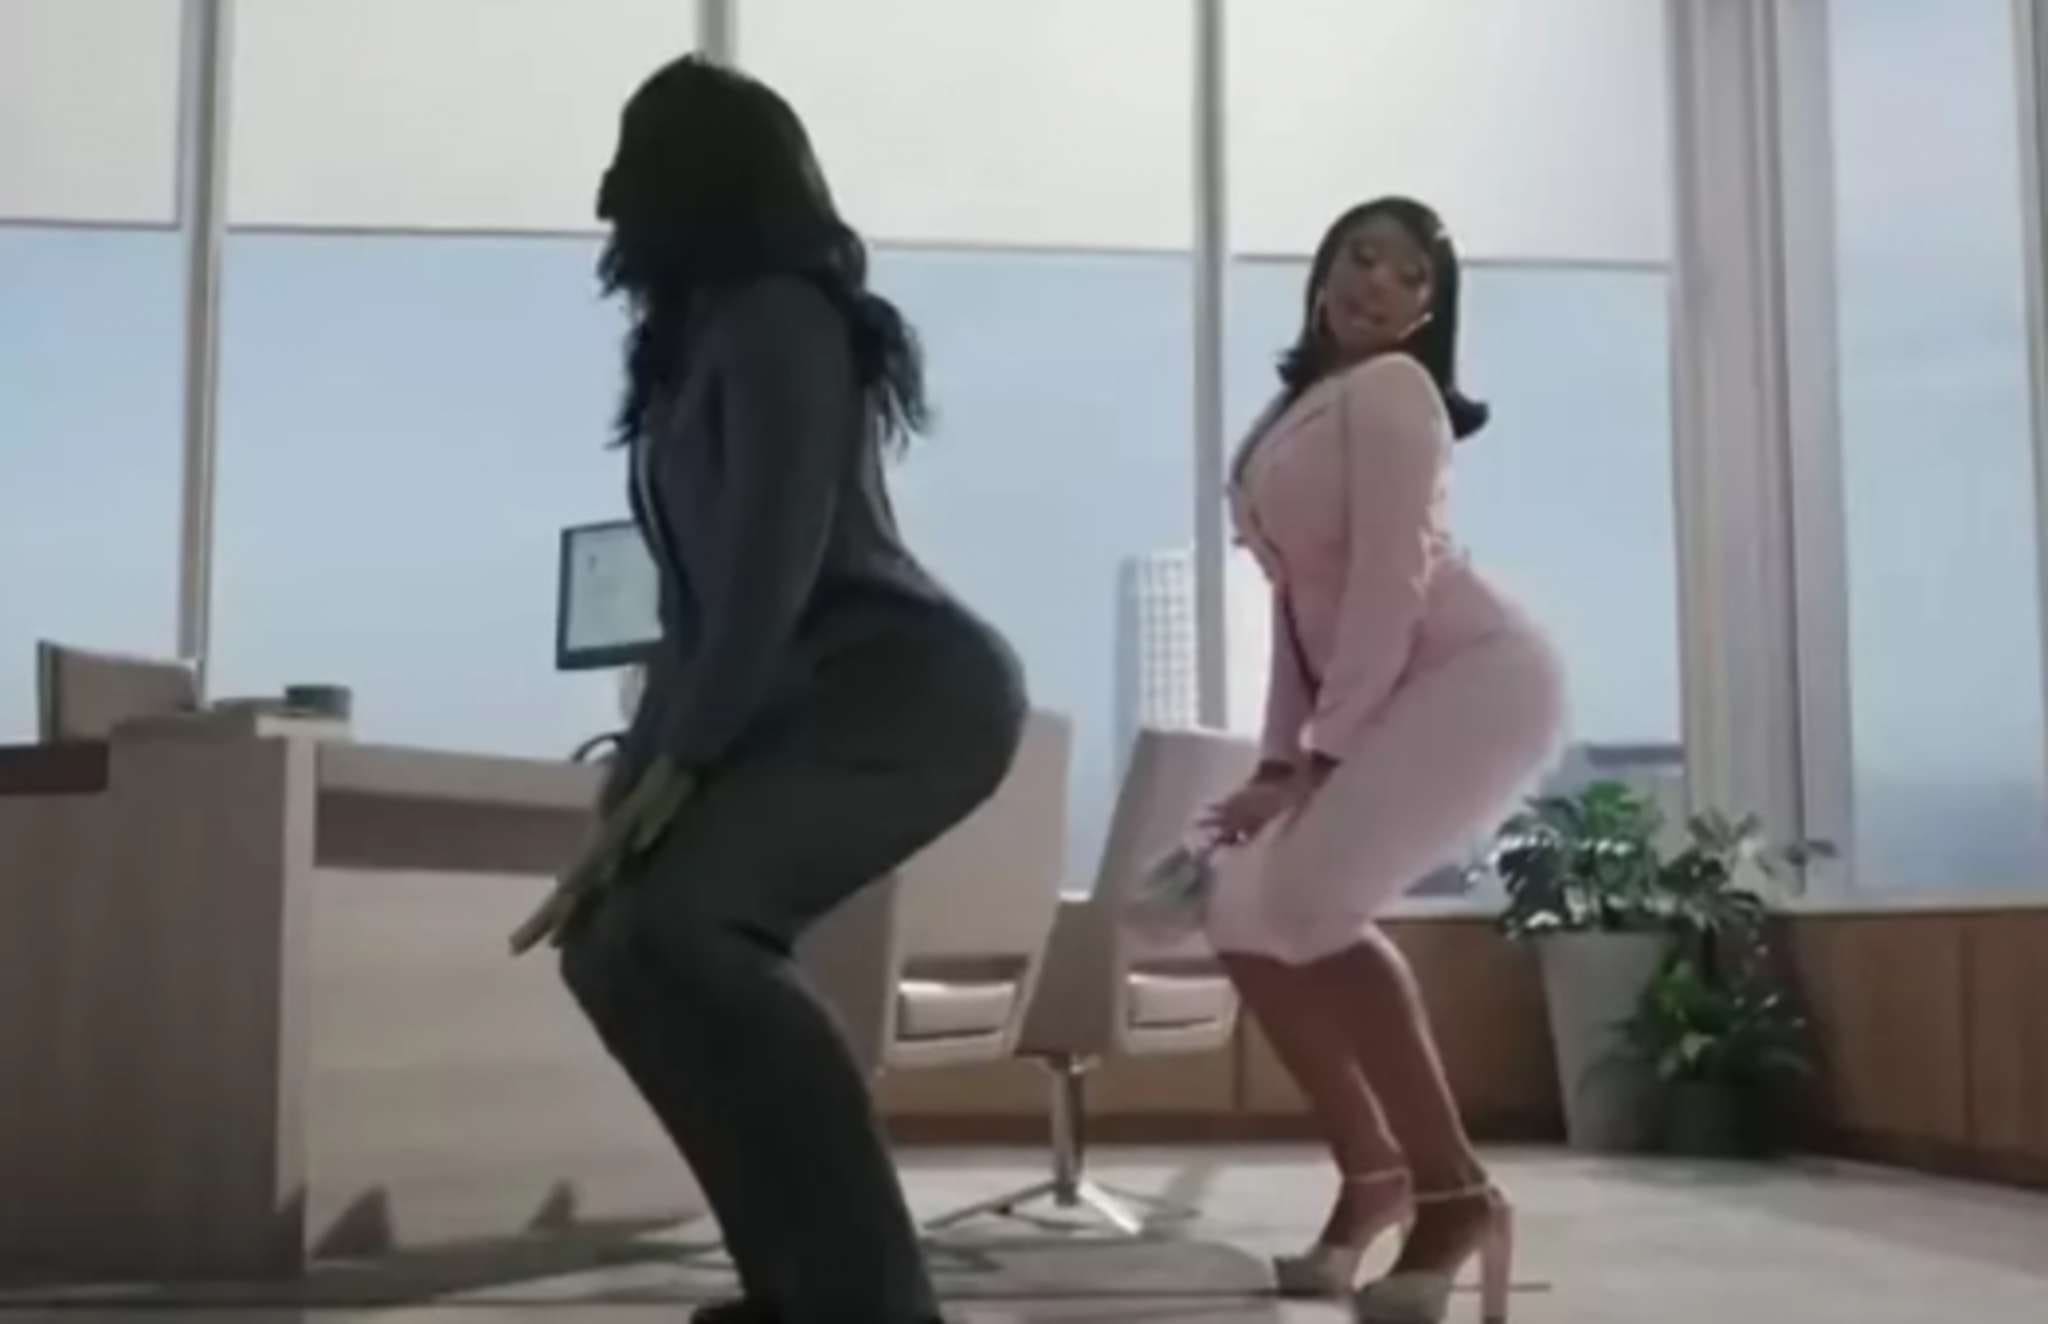 Social Networking Sites Goes Wild After Megan Thee Stallion's She-Hulk Attorney At Law Appearance